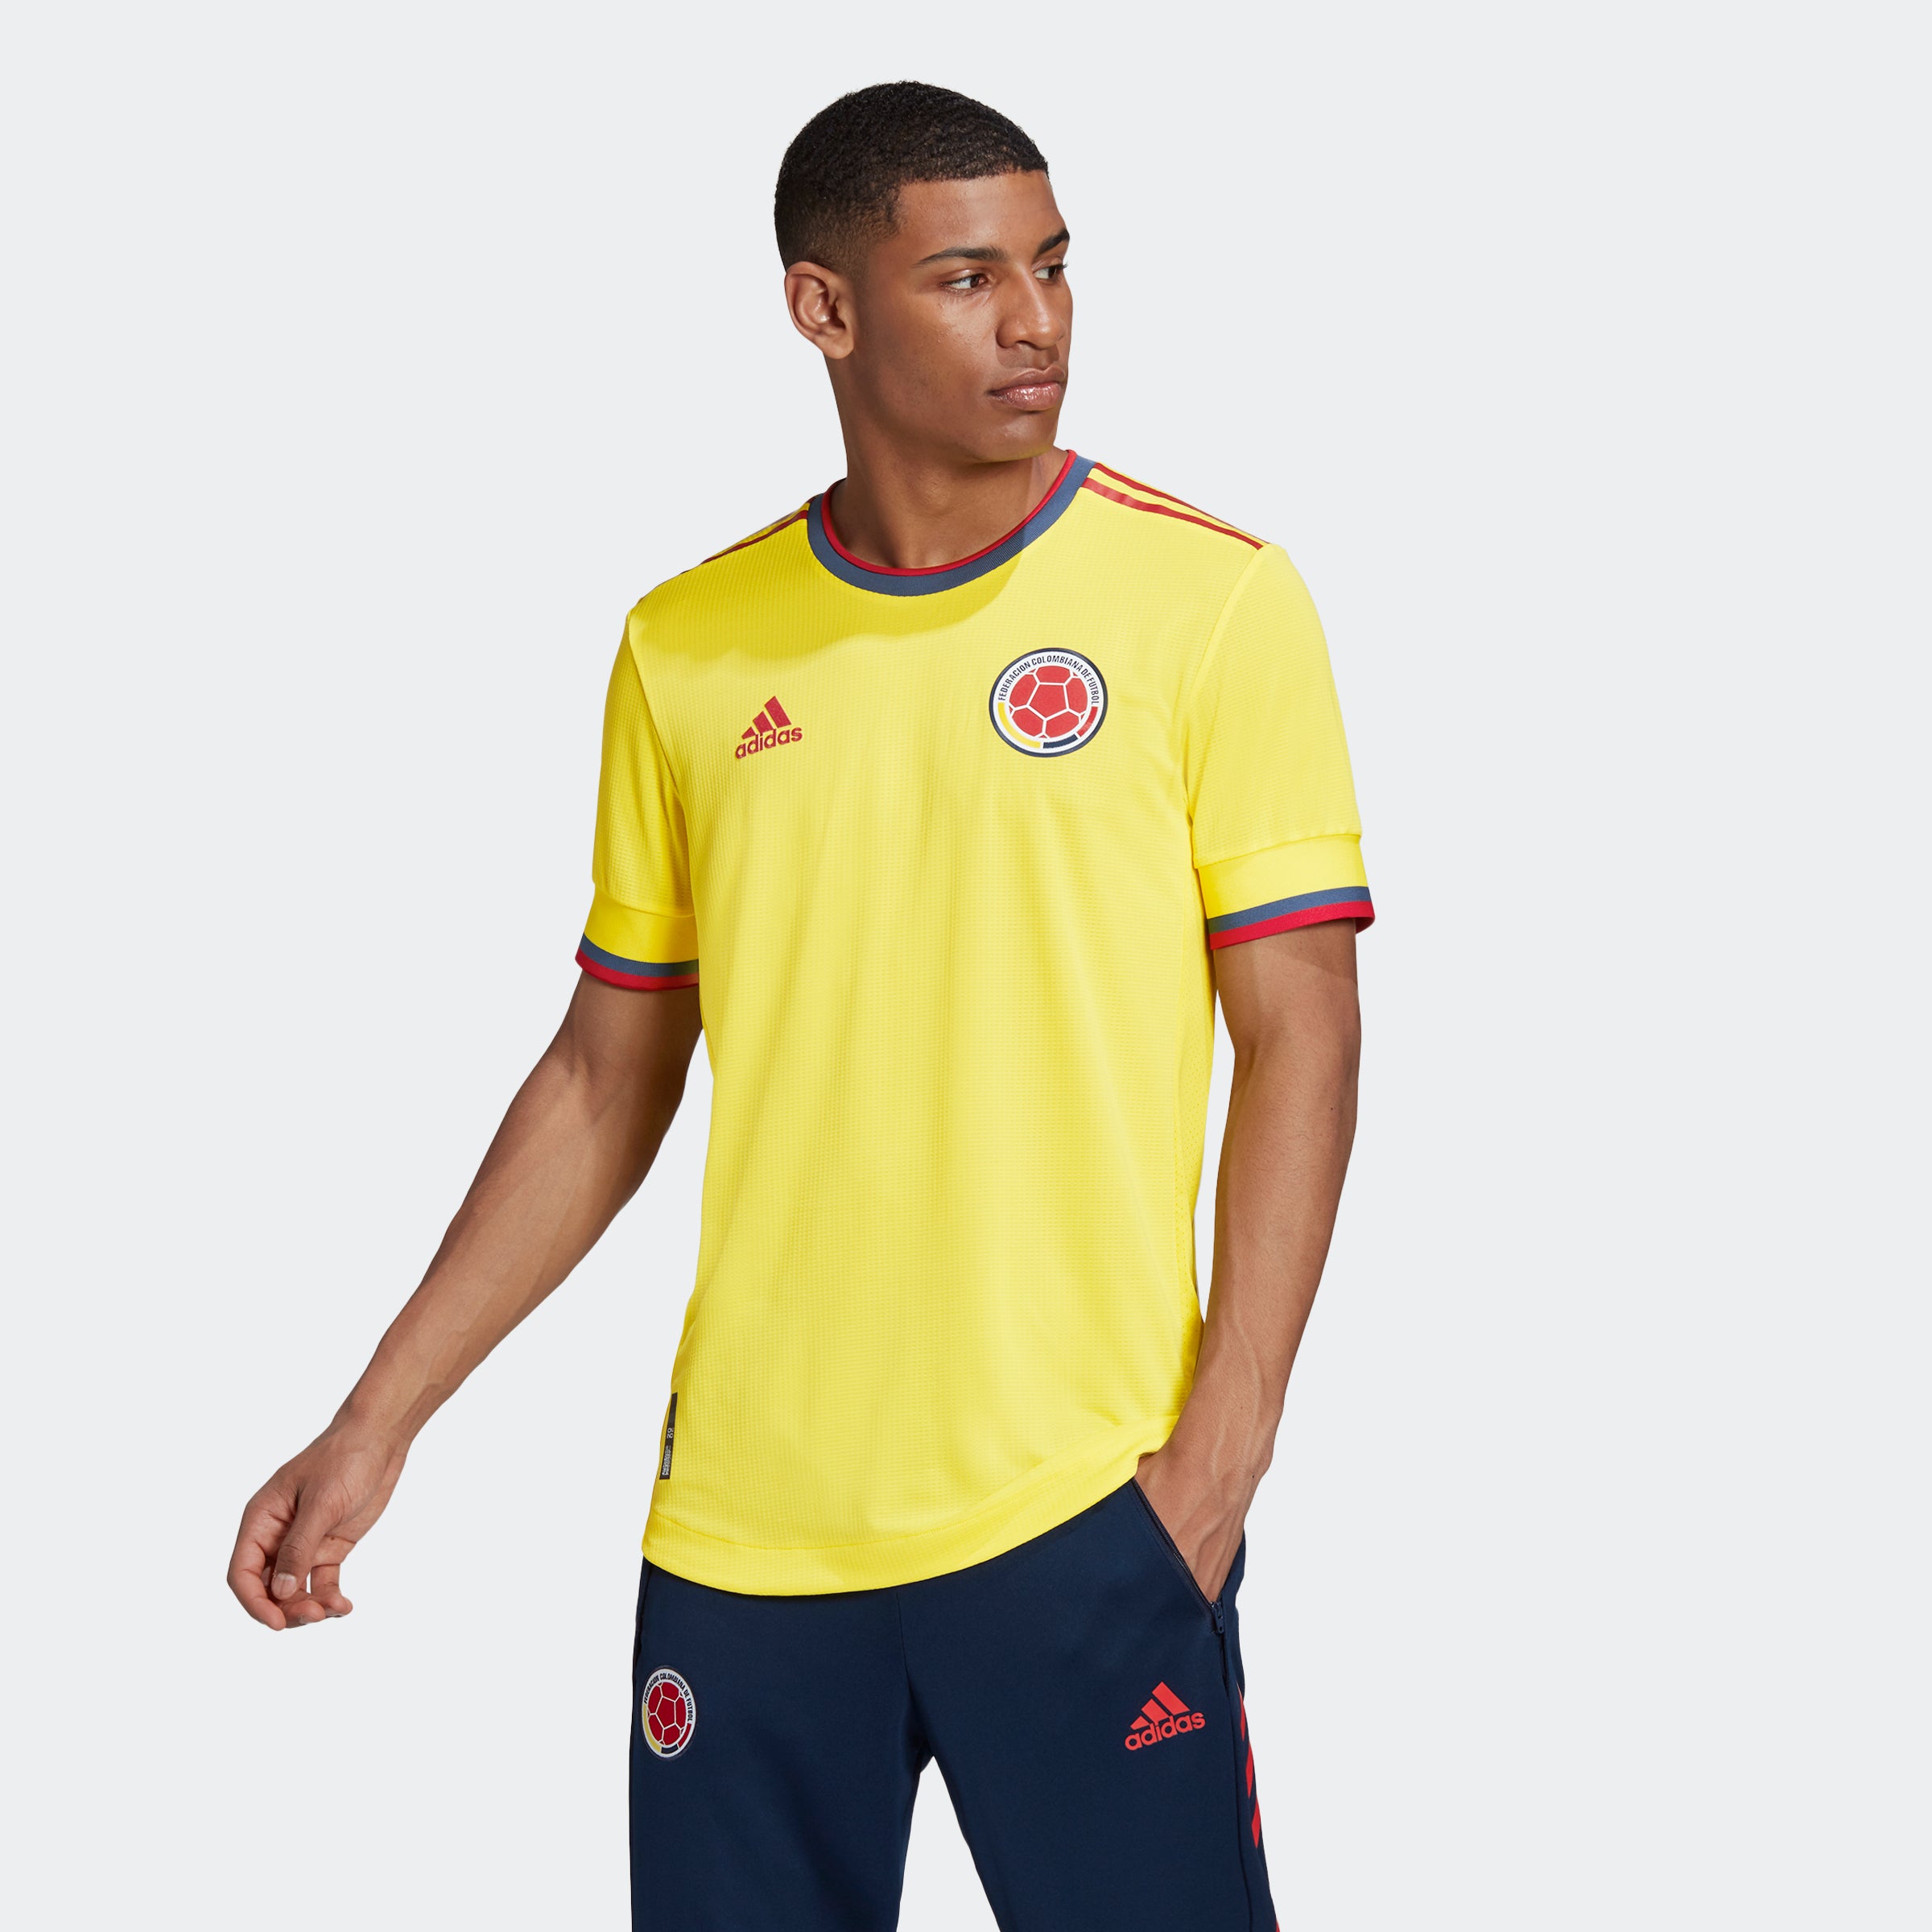 adidas Women's Colombia 15/16 Home Jersey Yellow/Navy/Red – Azteca